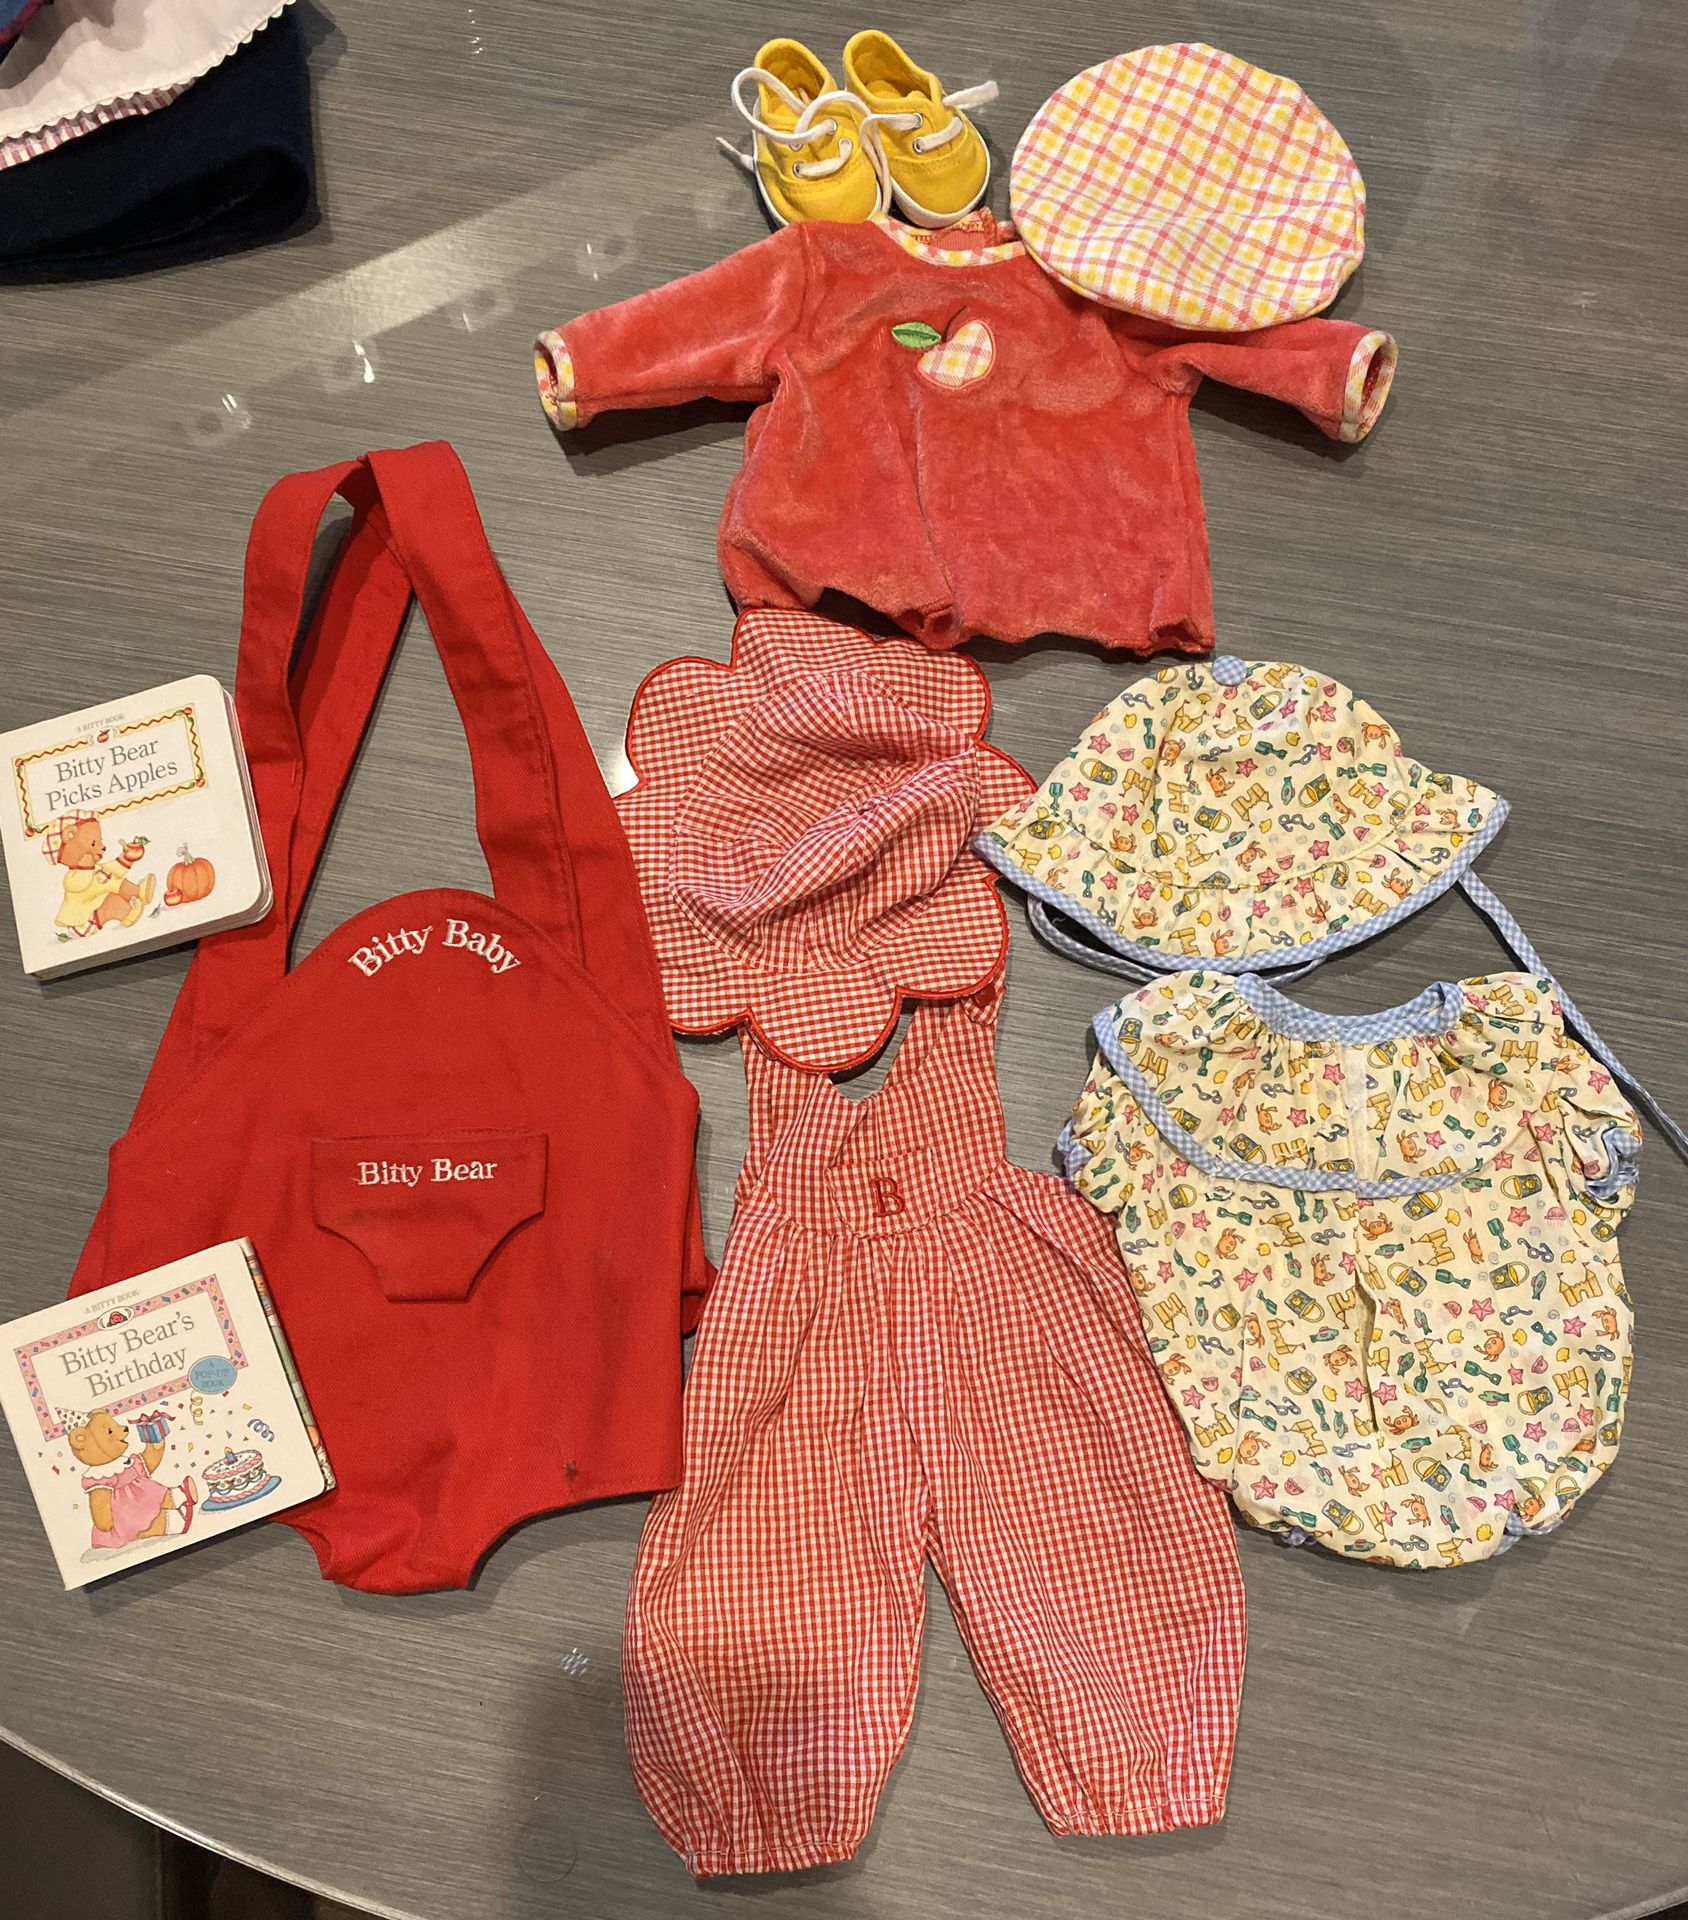 Bitty Baby American Girl clothing and accessory lot